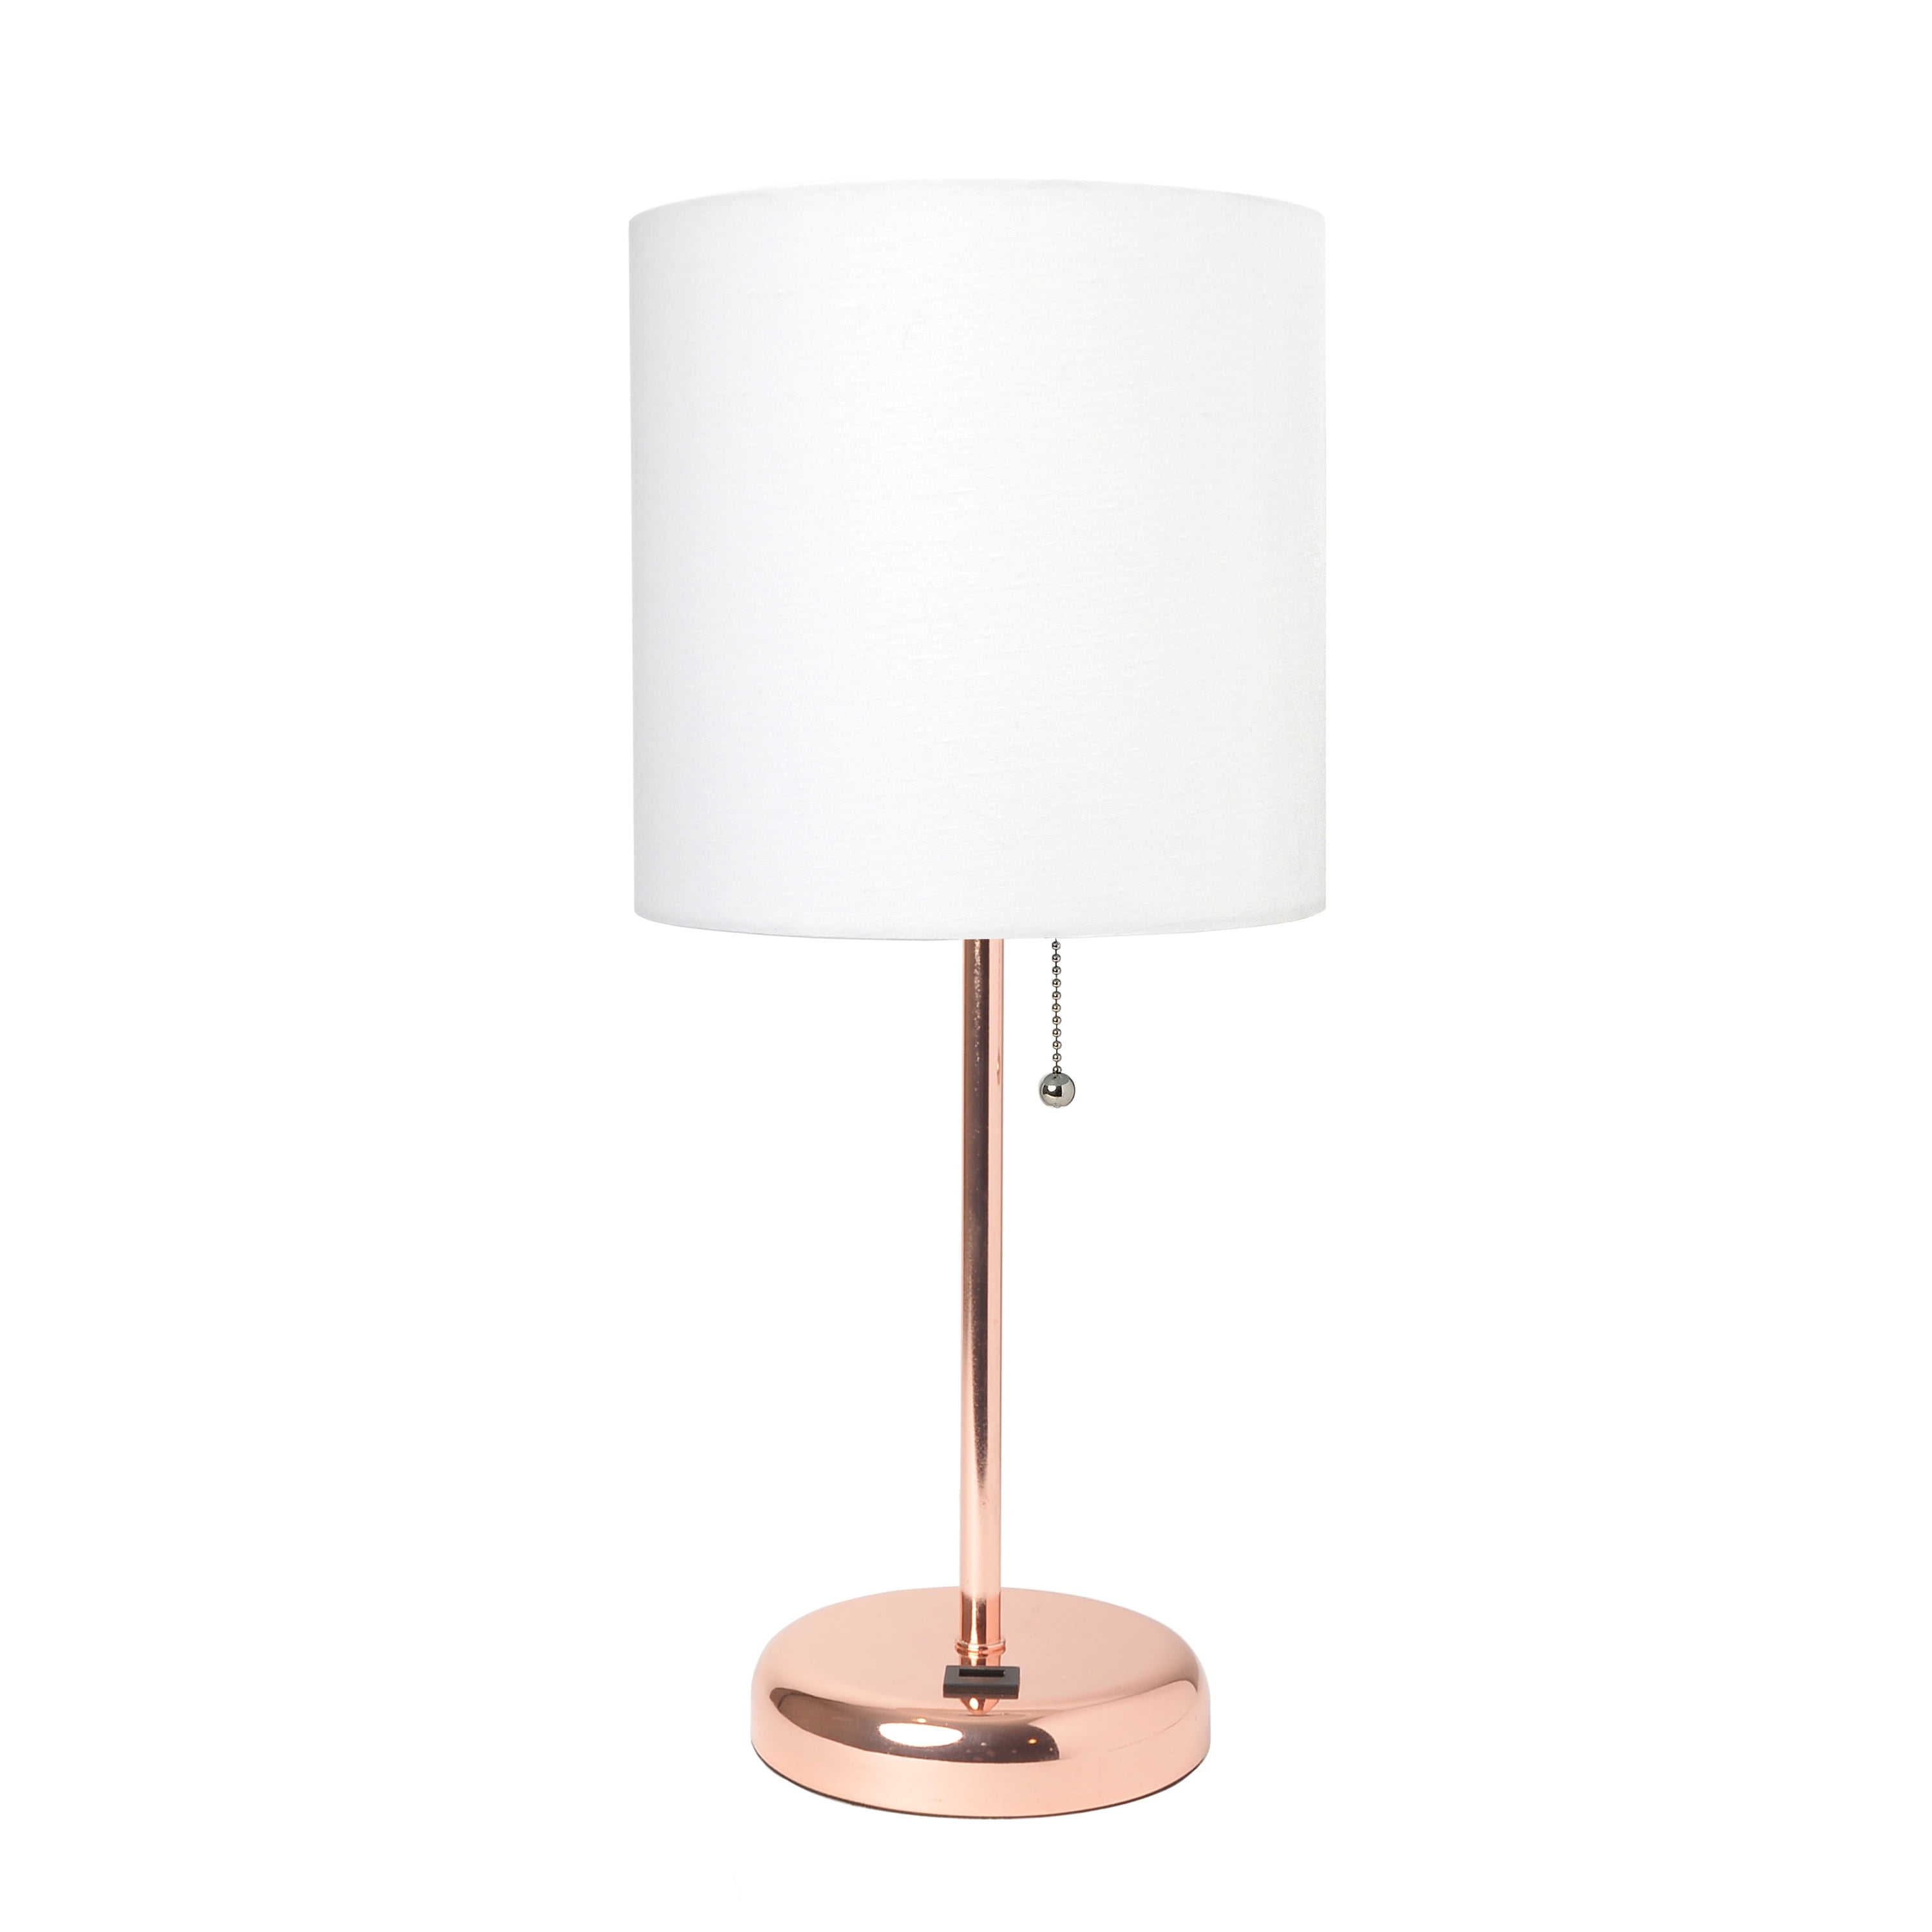 Lt2044-rgd Rose Gold Stick Table Lamp With Usb Charging Port & Fabric Shade, White